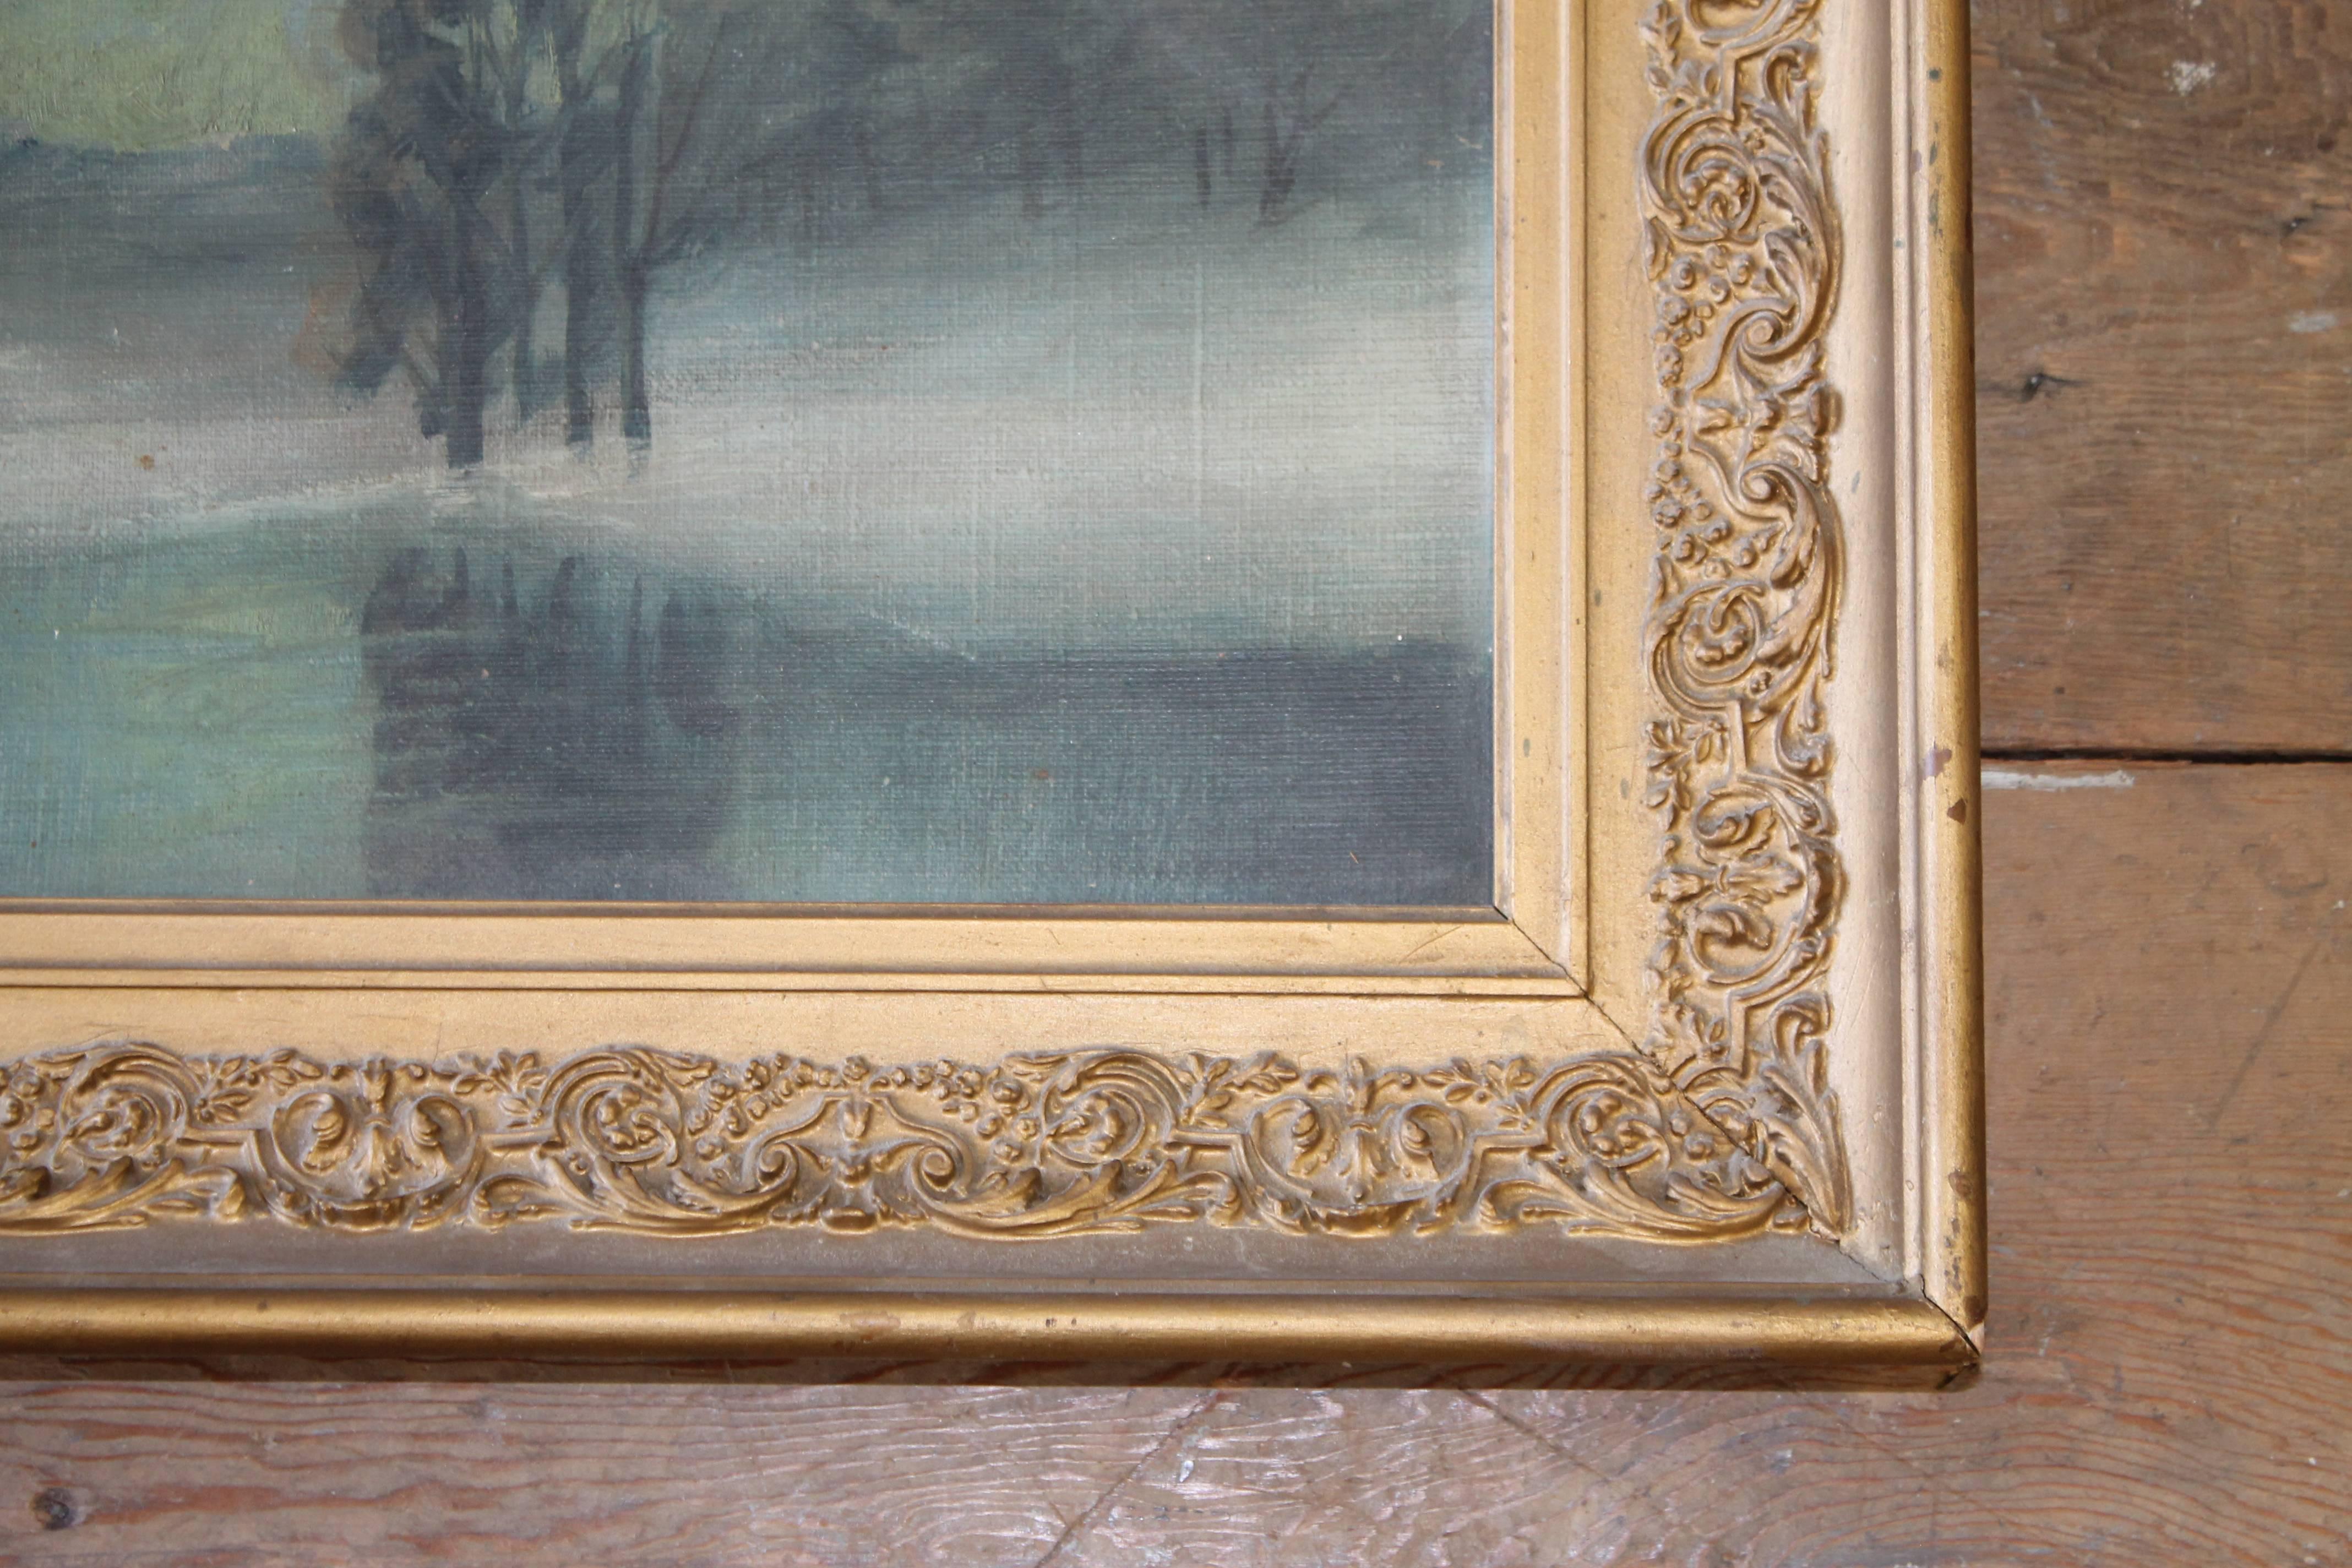 Beautiful river landscape oil on canvas, with fading sailboats in the distance. Soft grey-blue tones in a giltwood carved decorative frame. This is in good condition, minor scratches or scuffs may be present. The frame looks to be in good condition